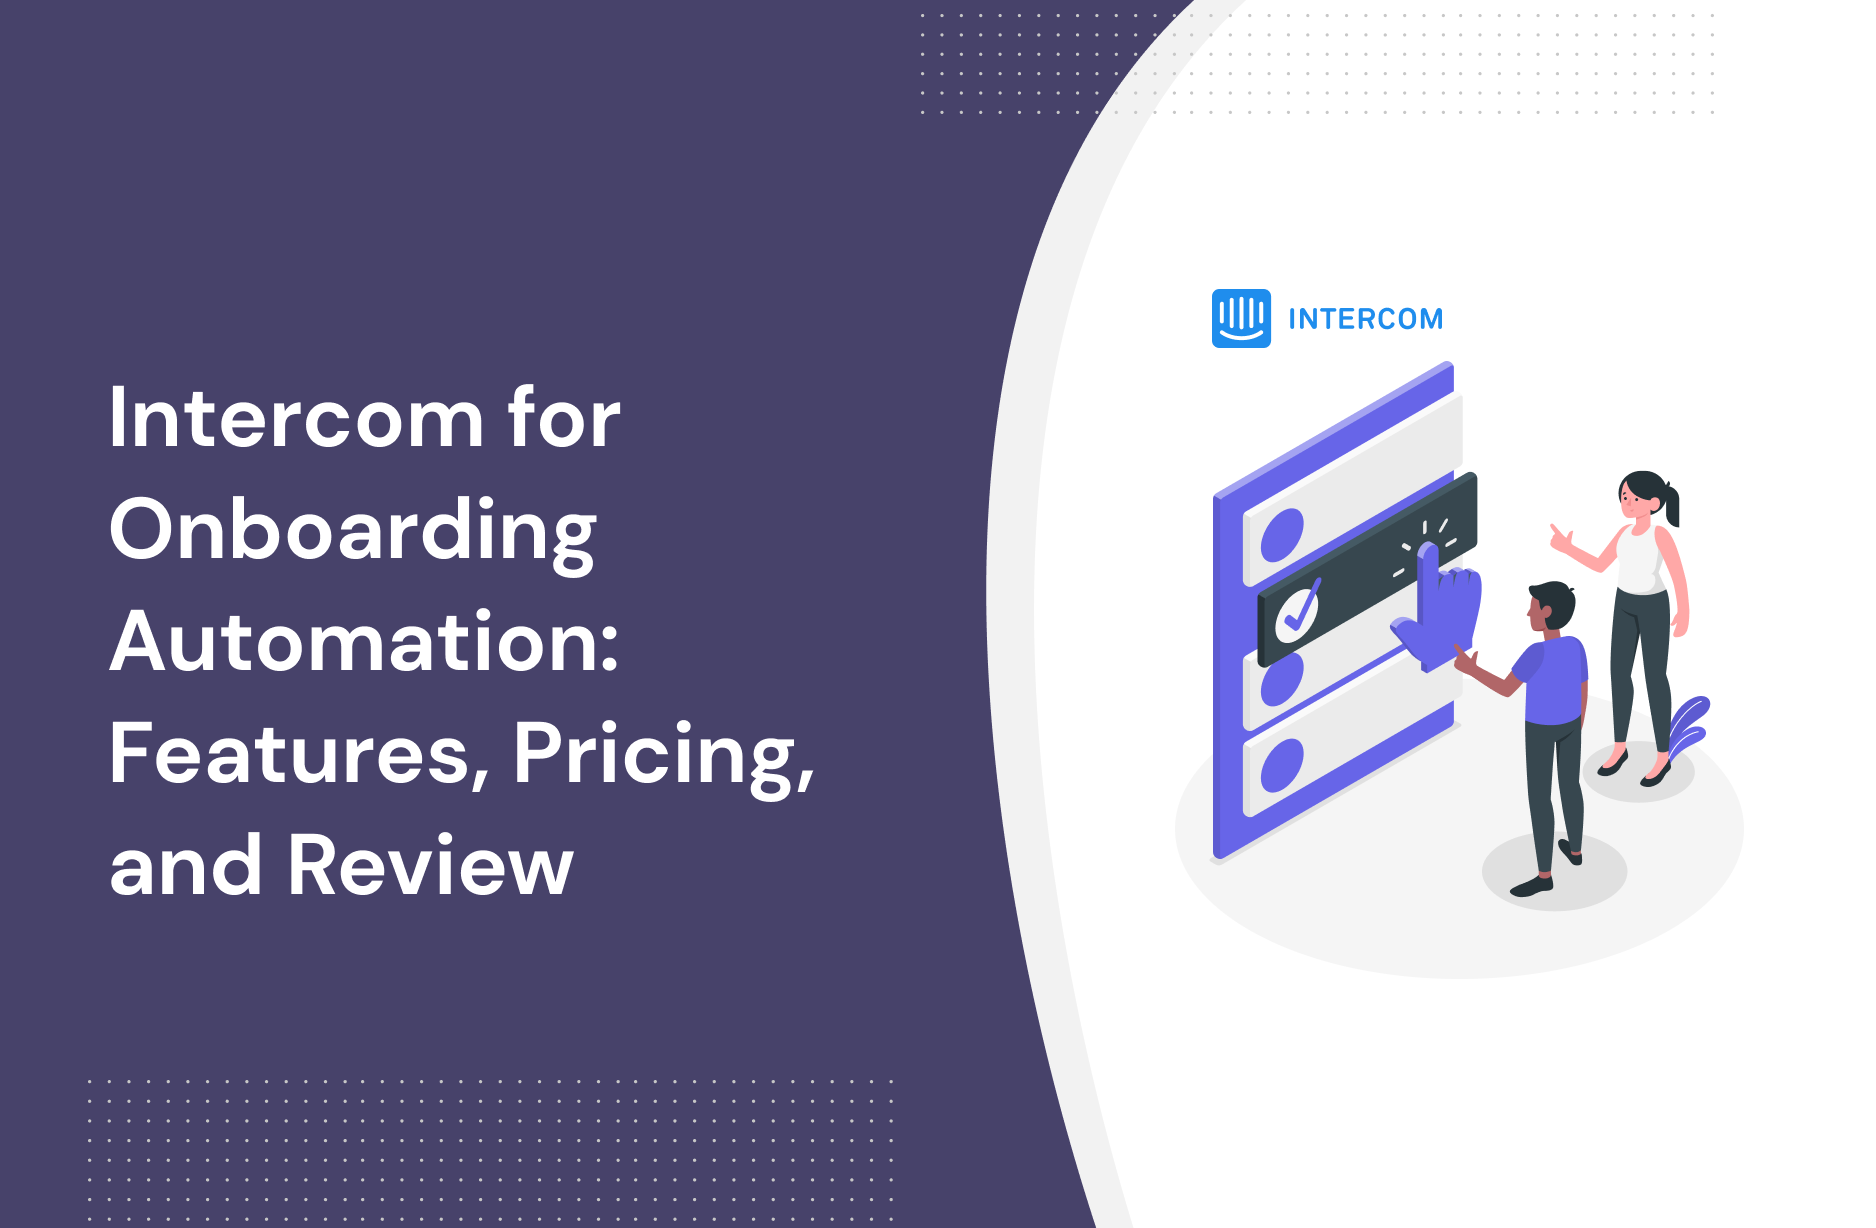 Intercom for Onboarding Automation: Features, Pricing, and Review